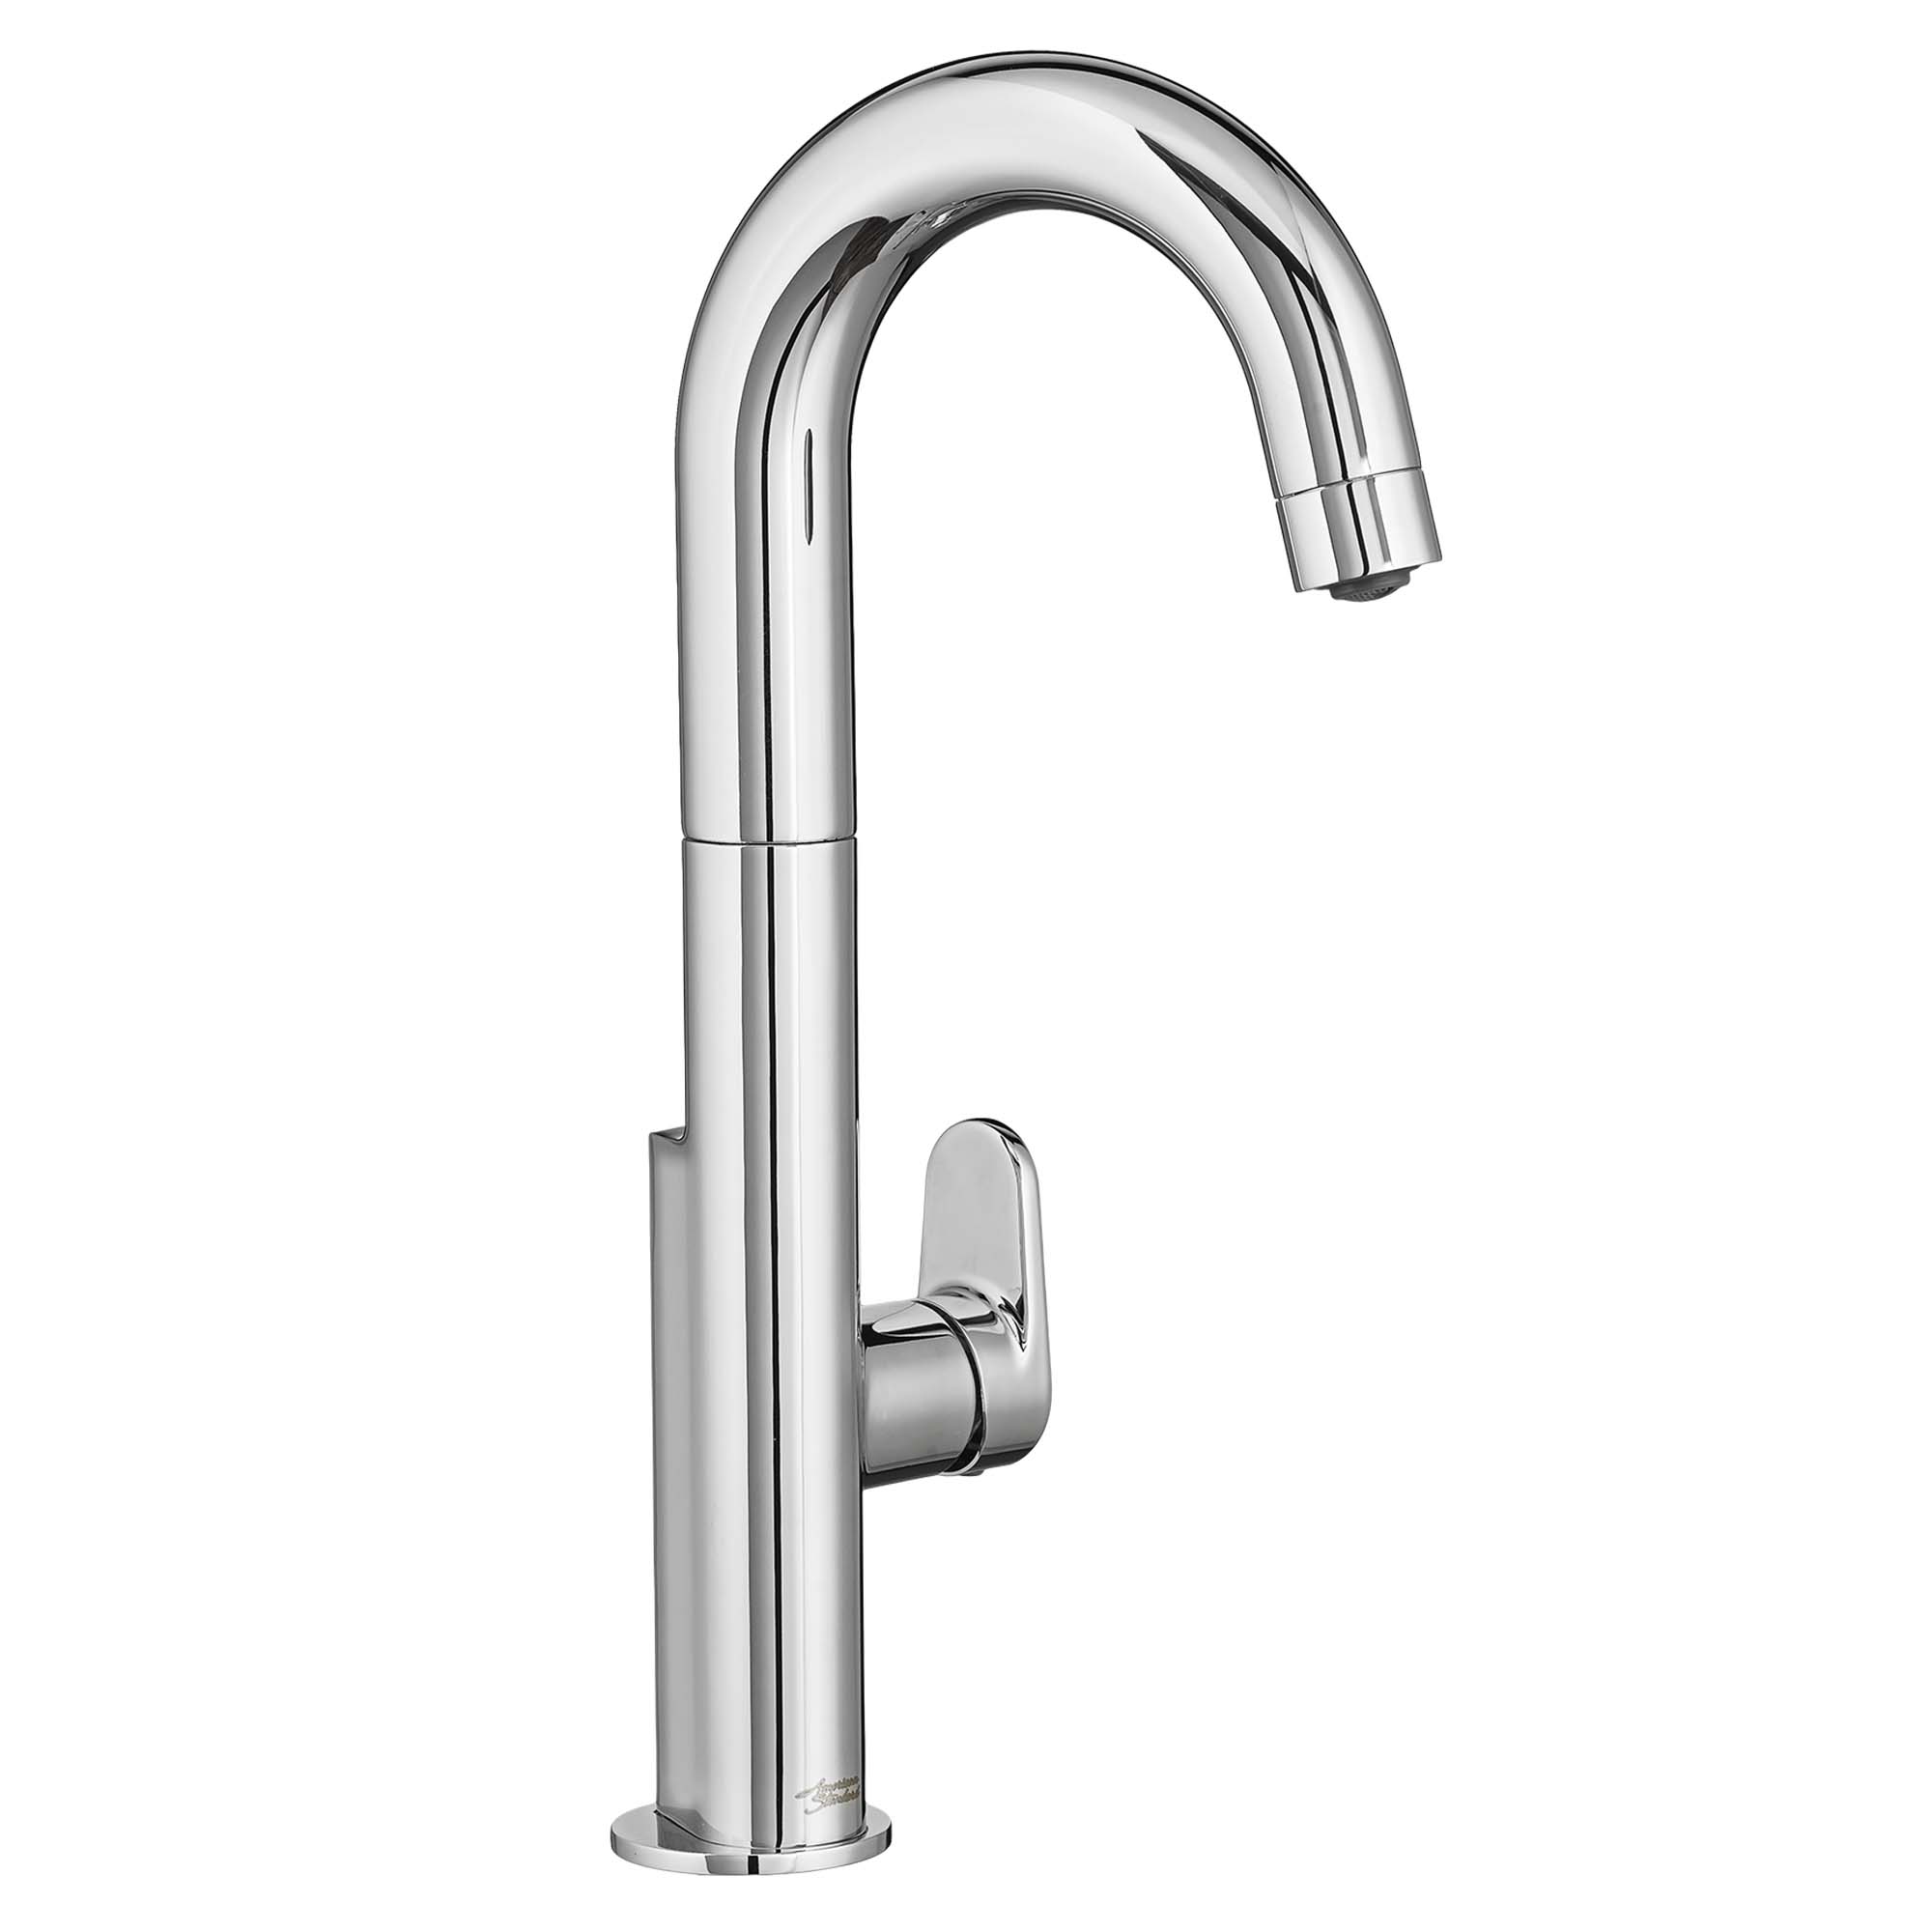 Beale Single Handle Pull-Down Spray Bar Faucet in Polished Chrome